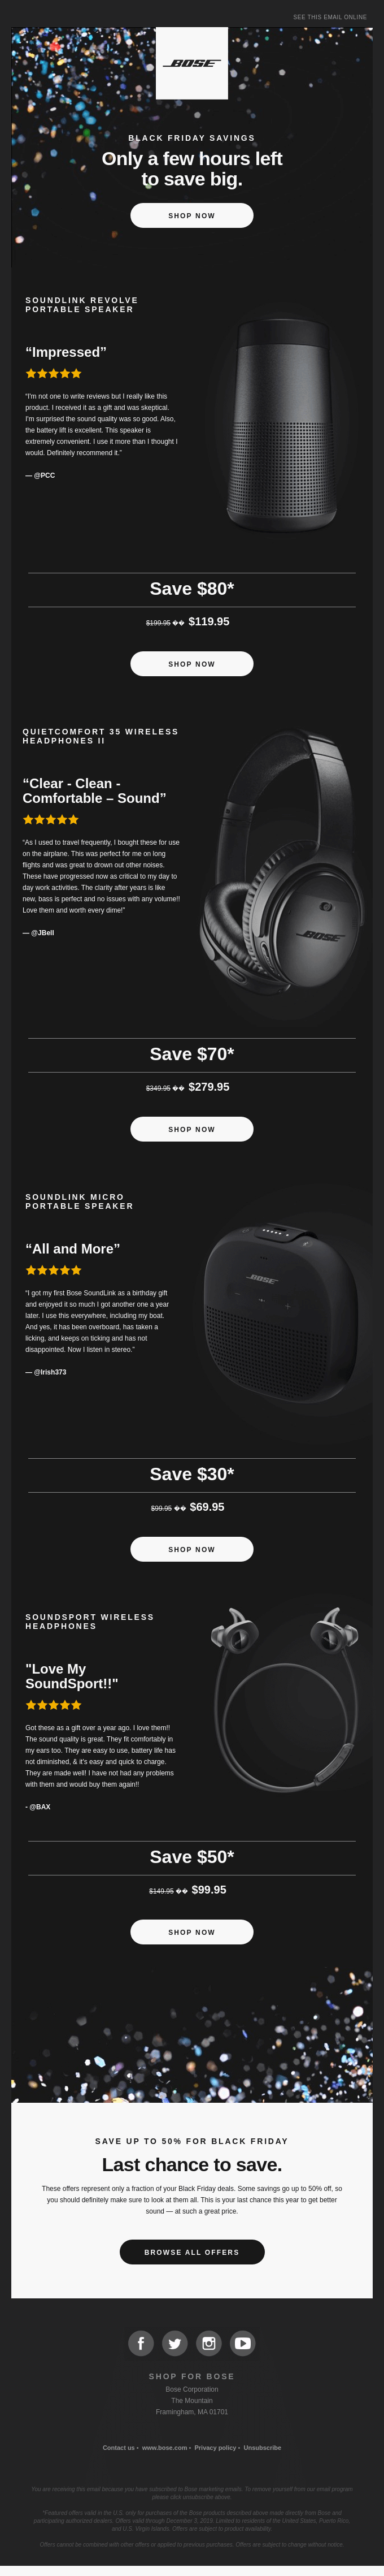 Black Friday is almost over 🔊🎧 You can still save with Bose